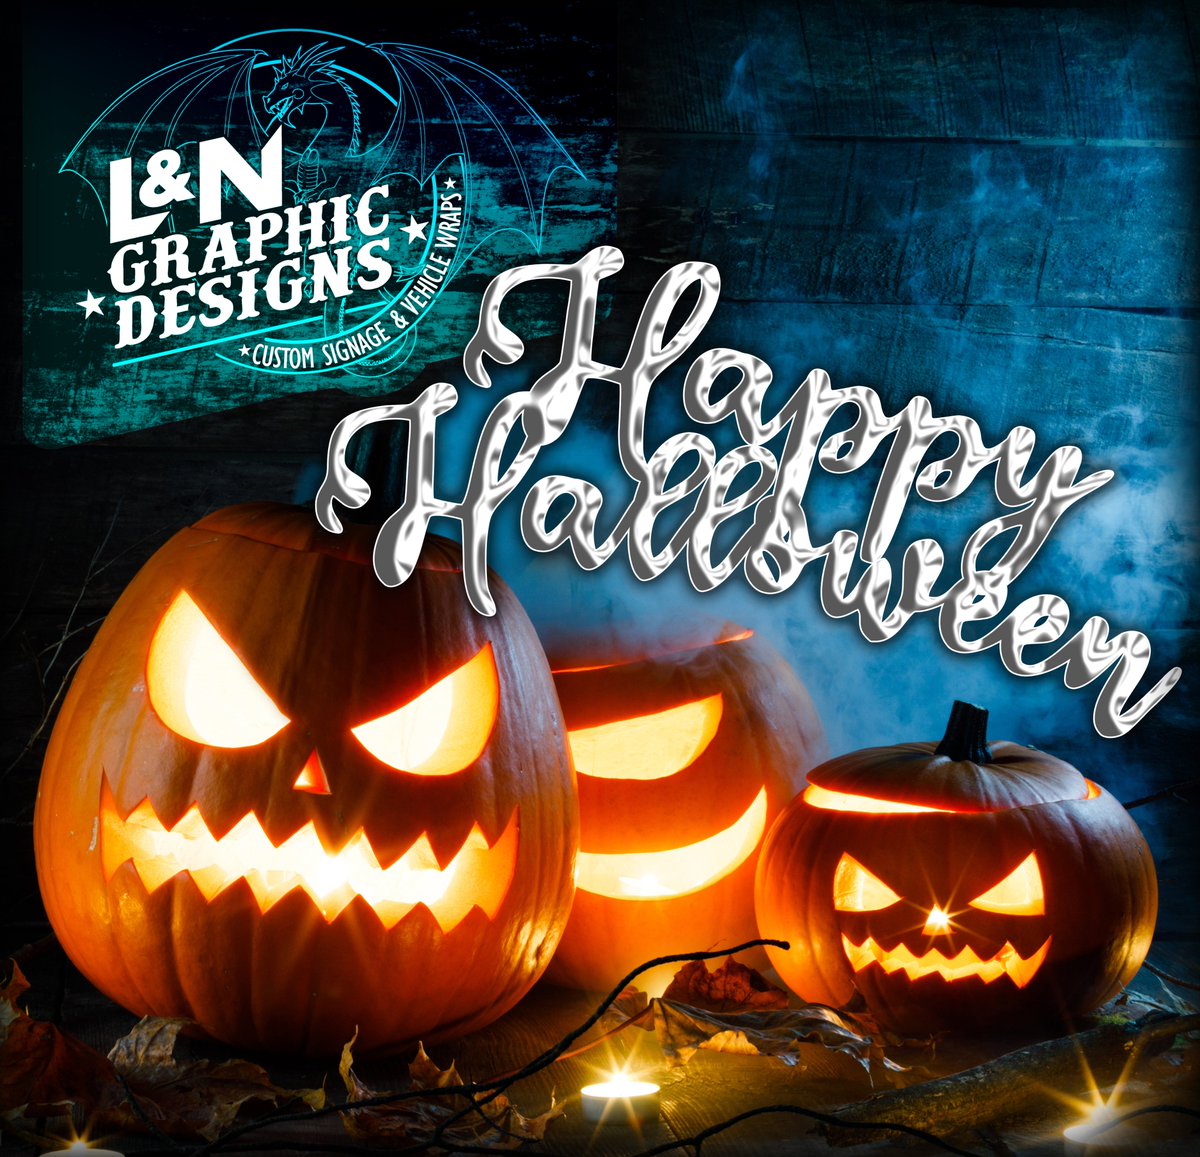 🕸🦇👻🎃 Happy Halloween 🎃👻🦇🕸

#halloween2019 #halloween #spooky #pumpkin #lngraphicdesigns #graphicdesign #vinylprinting #smallbusiness #signs #signage #banners #flags #coventry #rugby #smcov #covhour